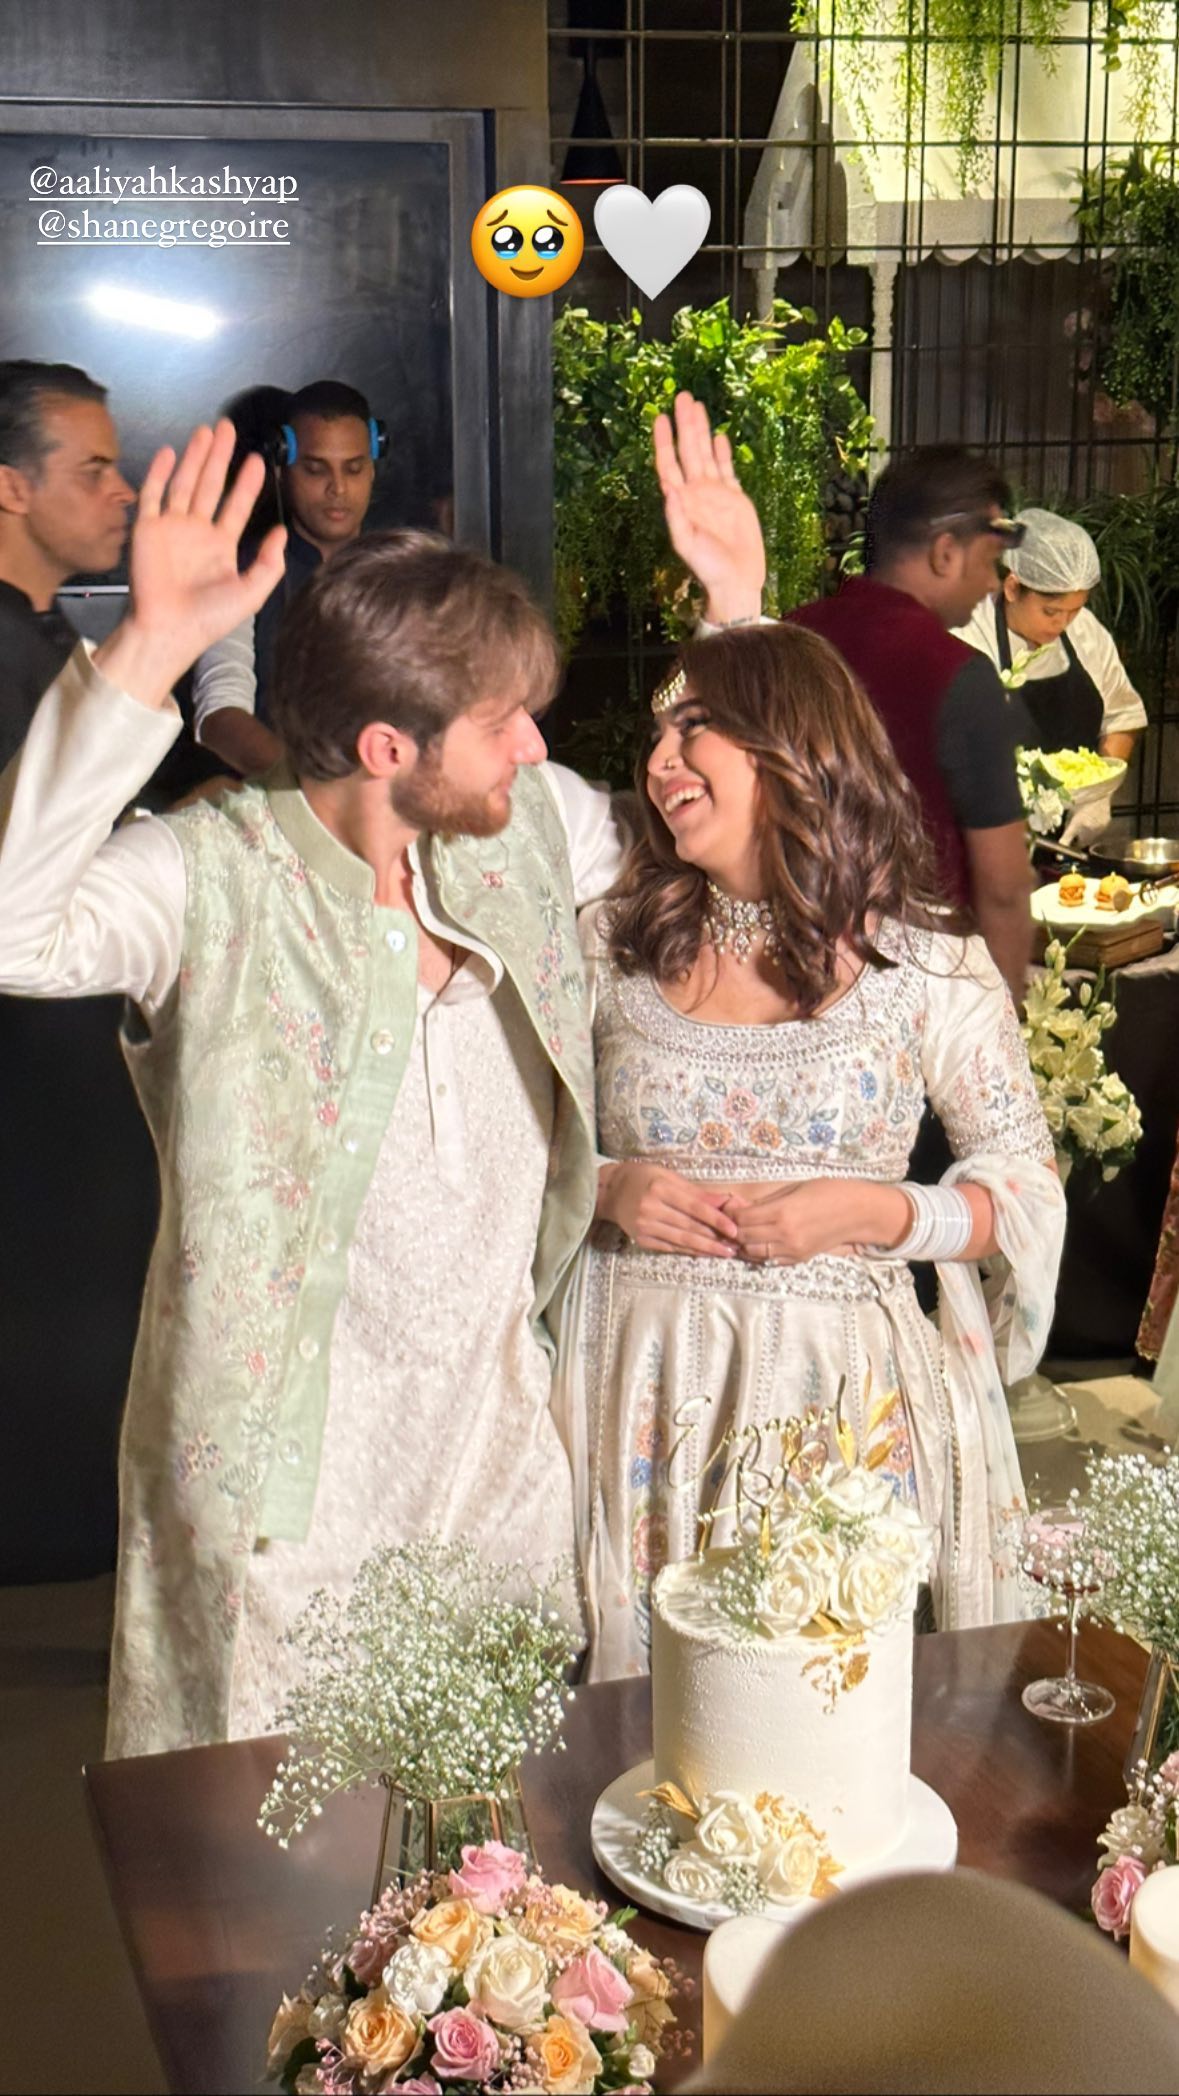 Aaliyah-Kashyap-and-Shane-Gregoire-are-all-smiles-cutting-their-engagement-cake